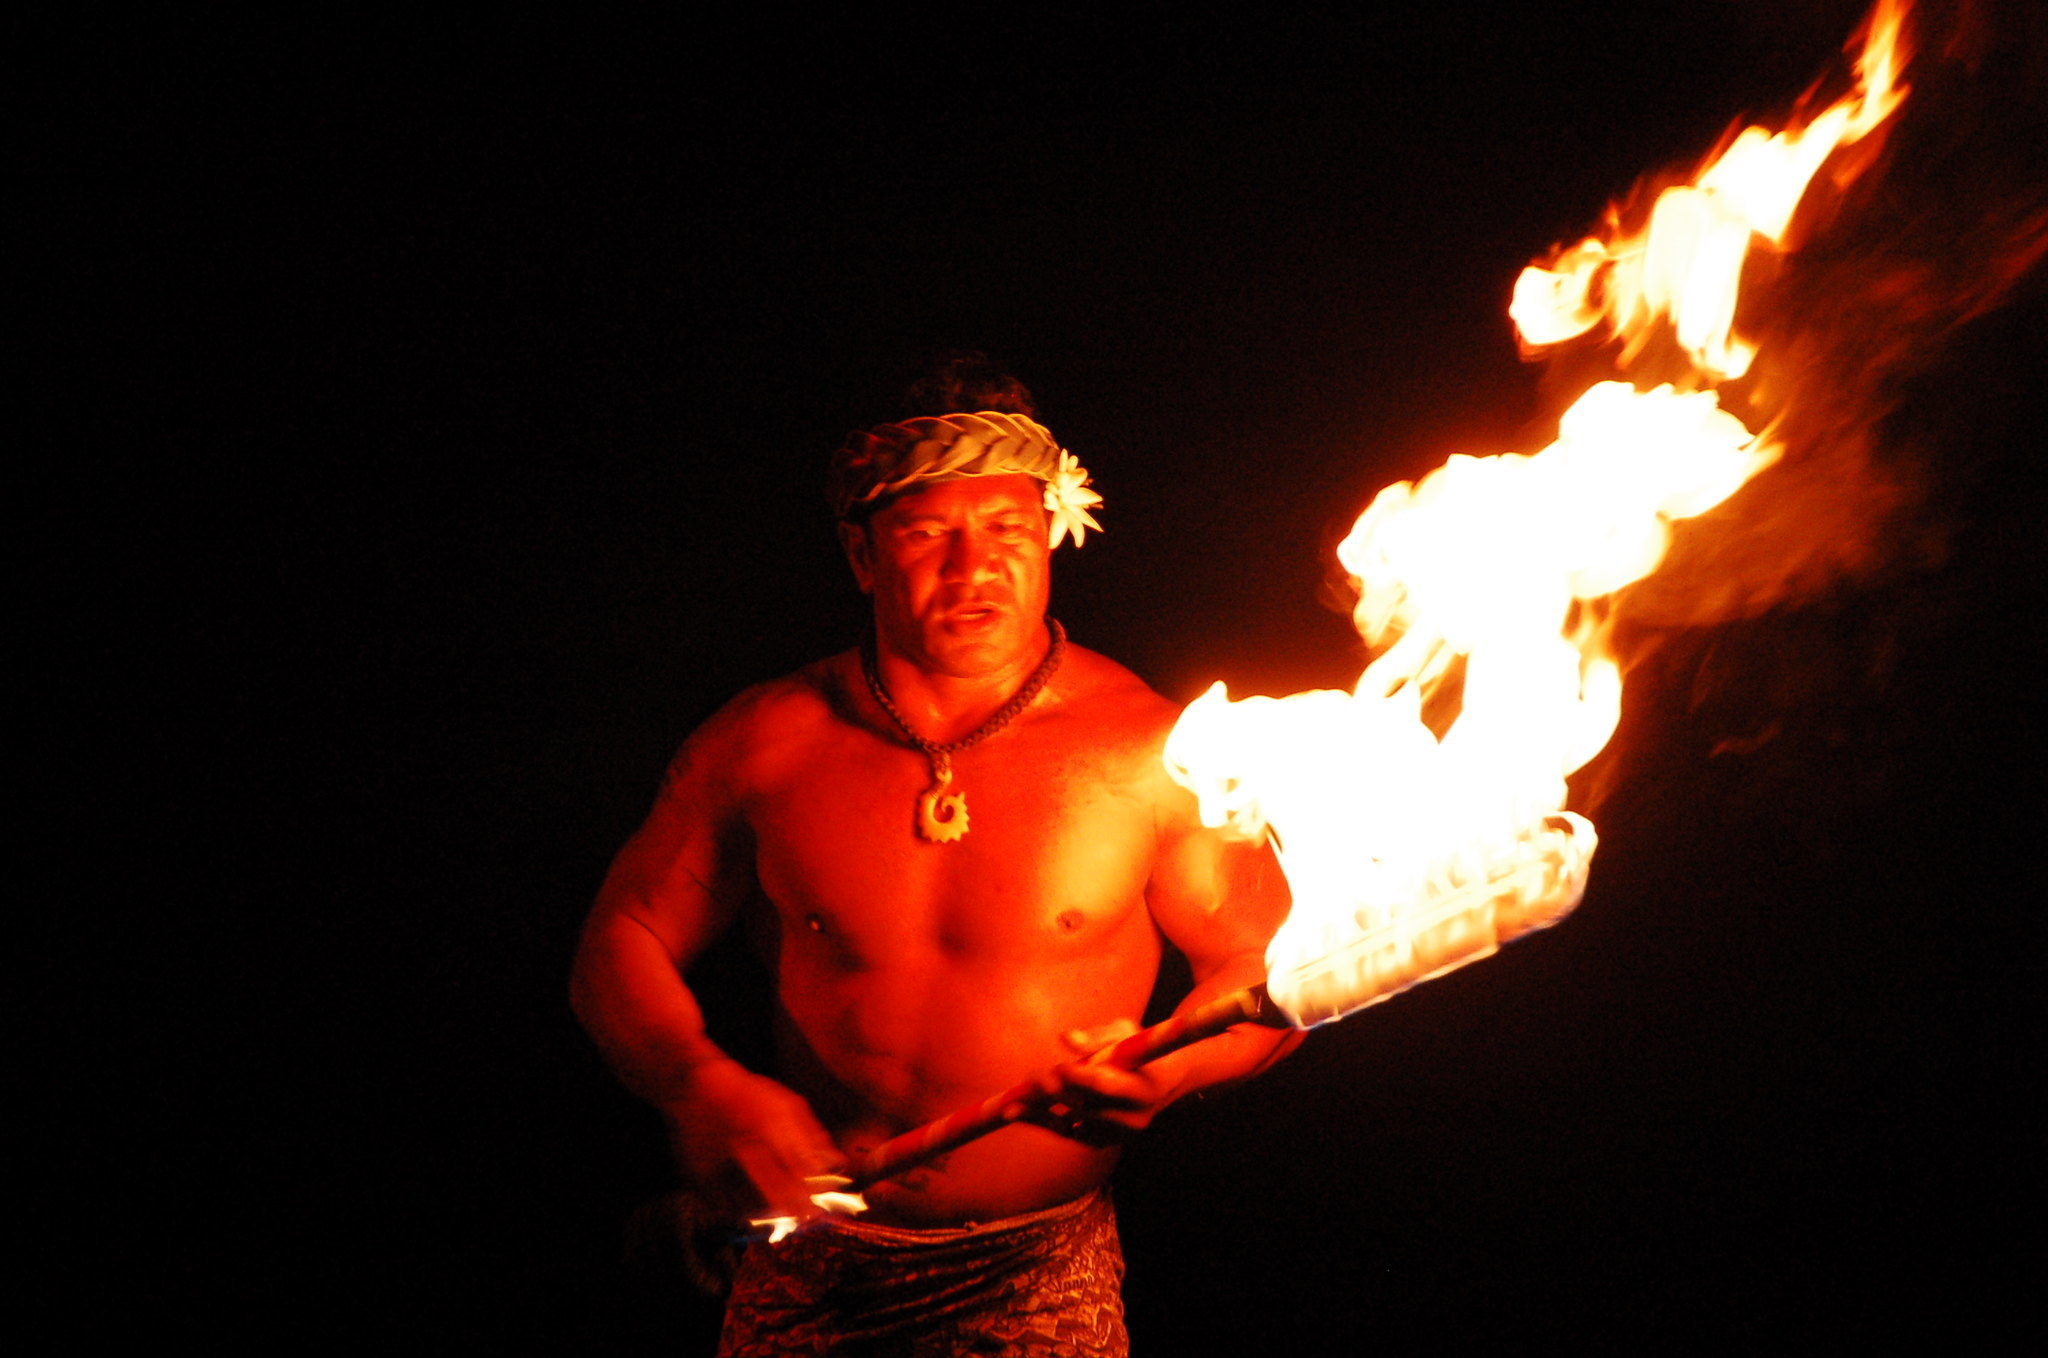 A man holding a flaming baton performs a siva.